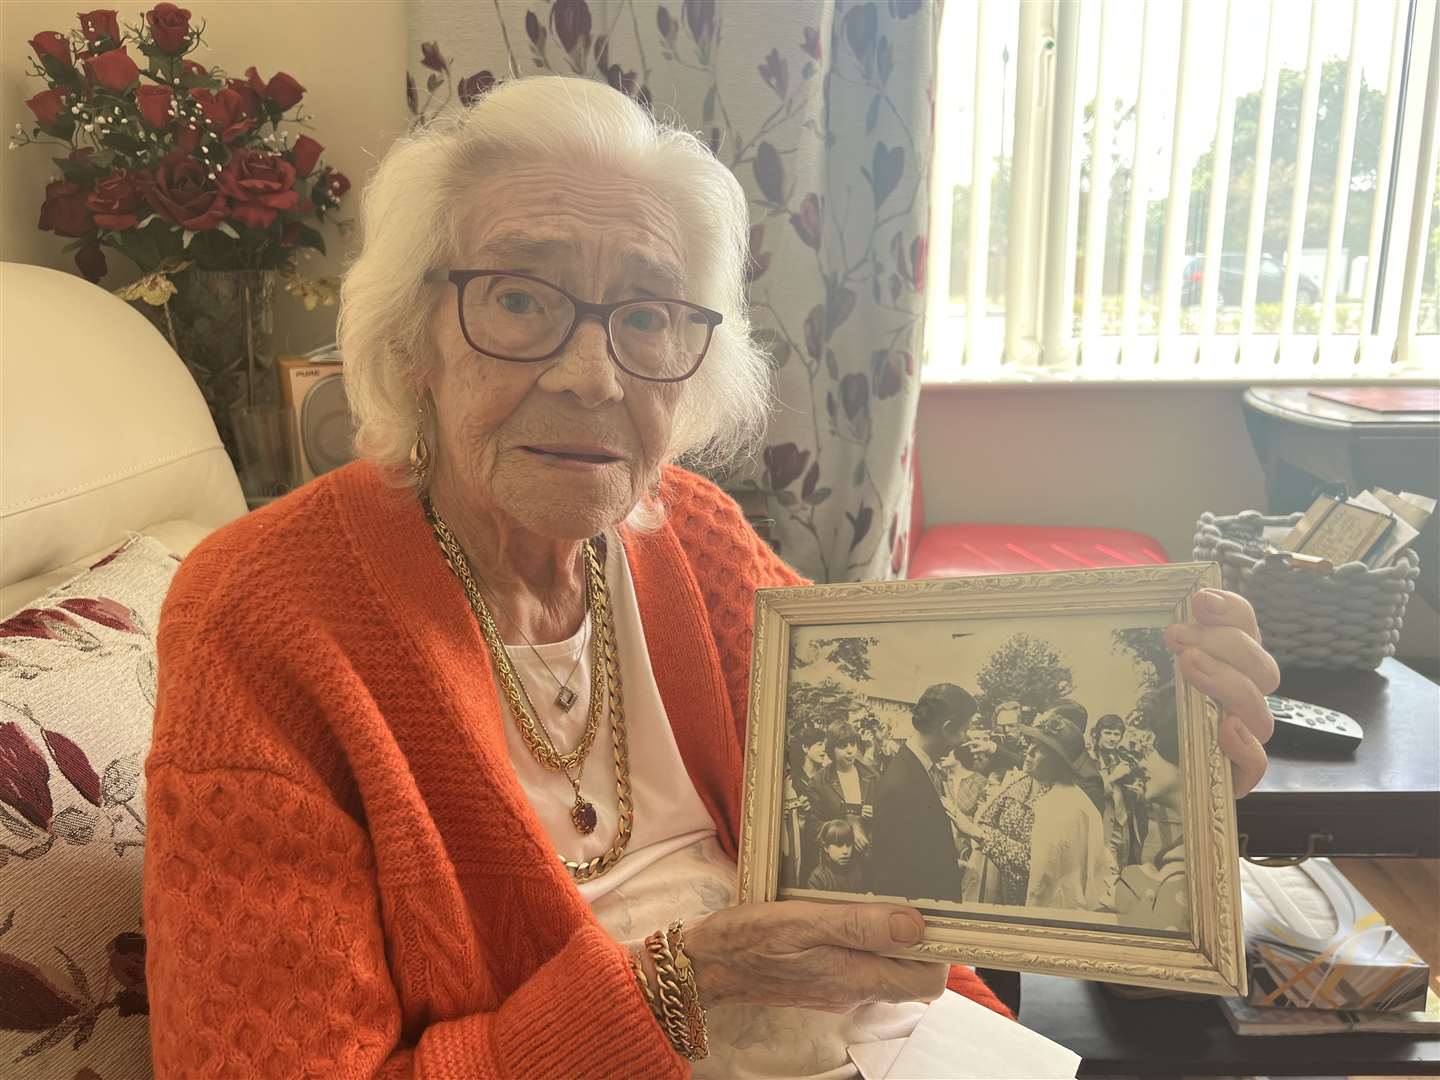 Kathy Martin, 91, from Minster, shared her experience of meeting the future King